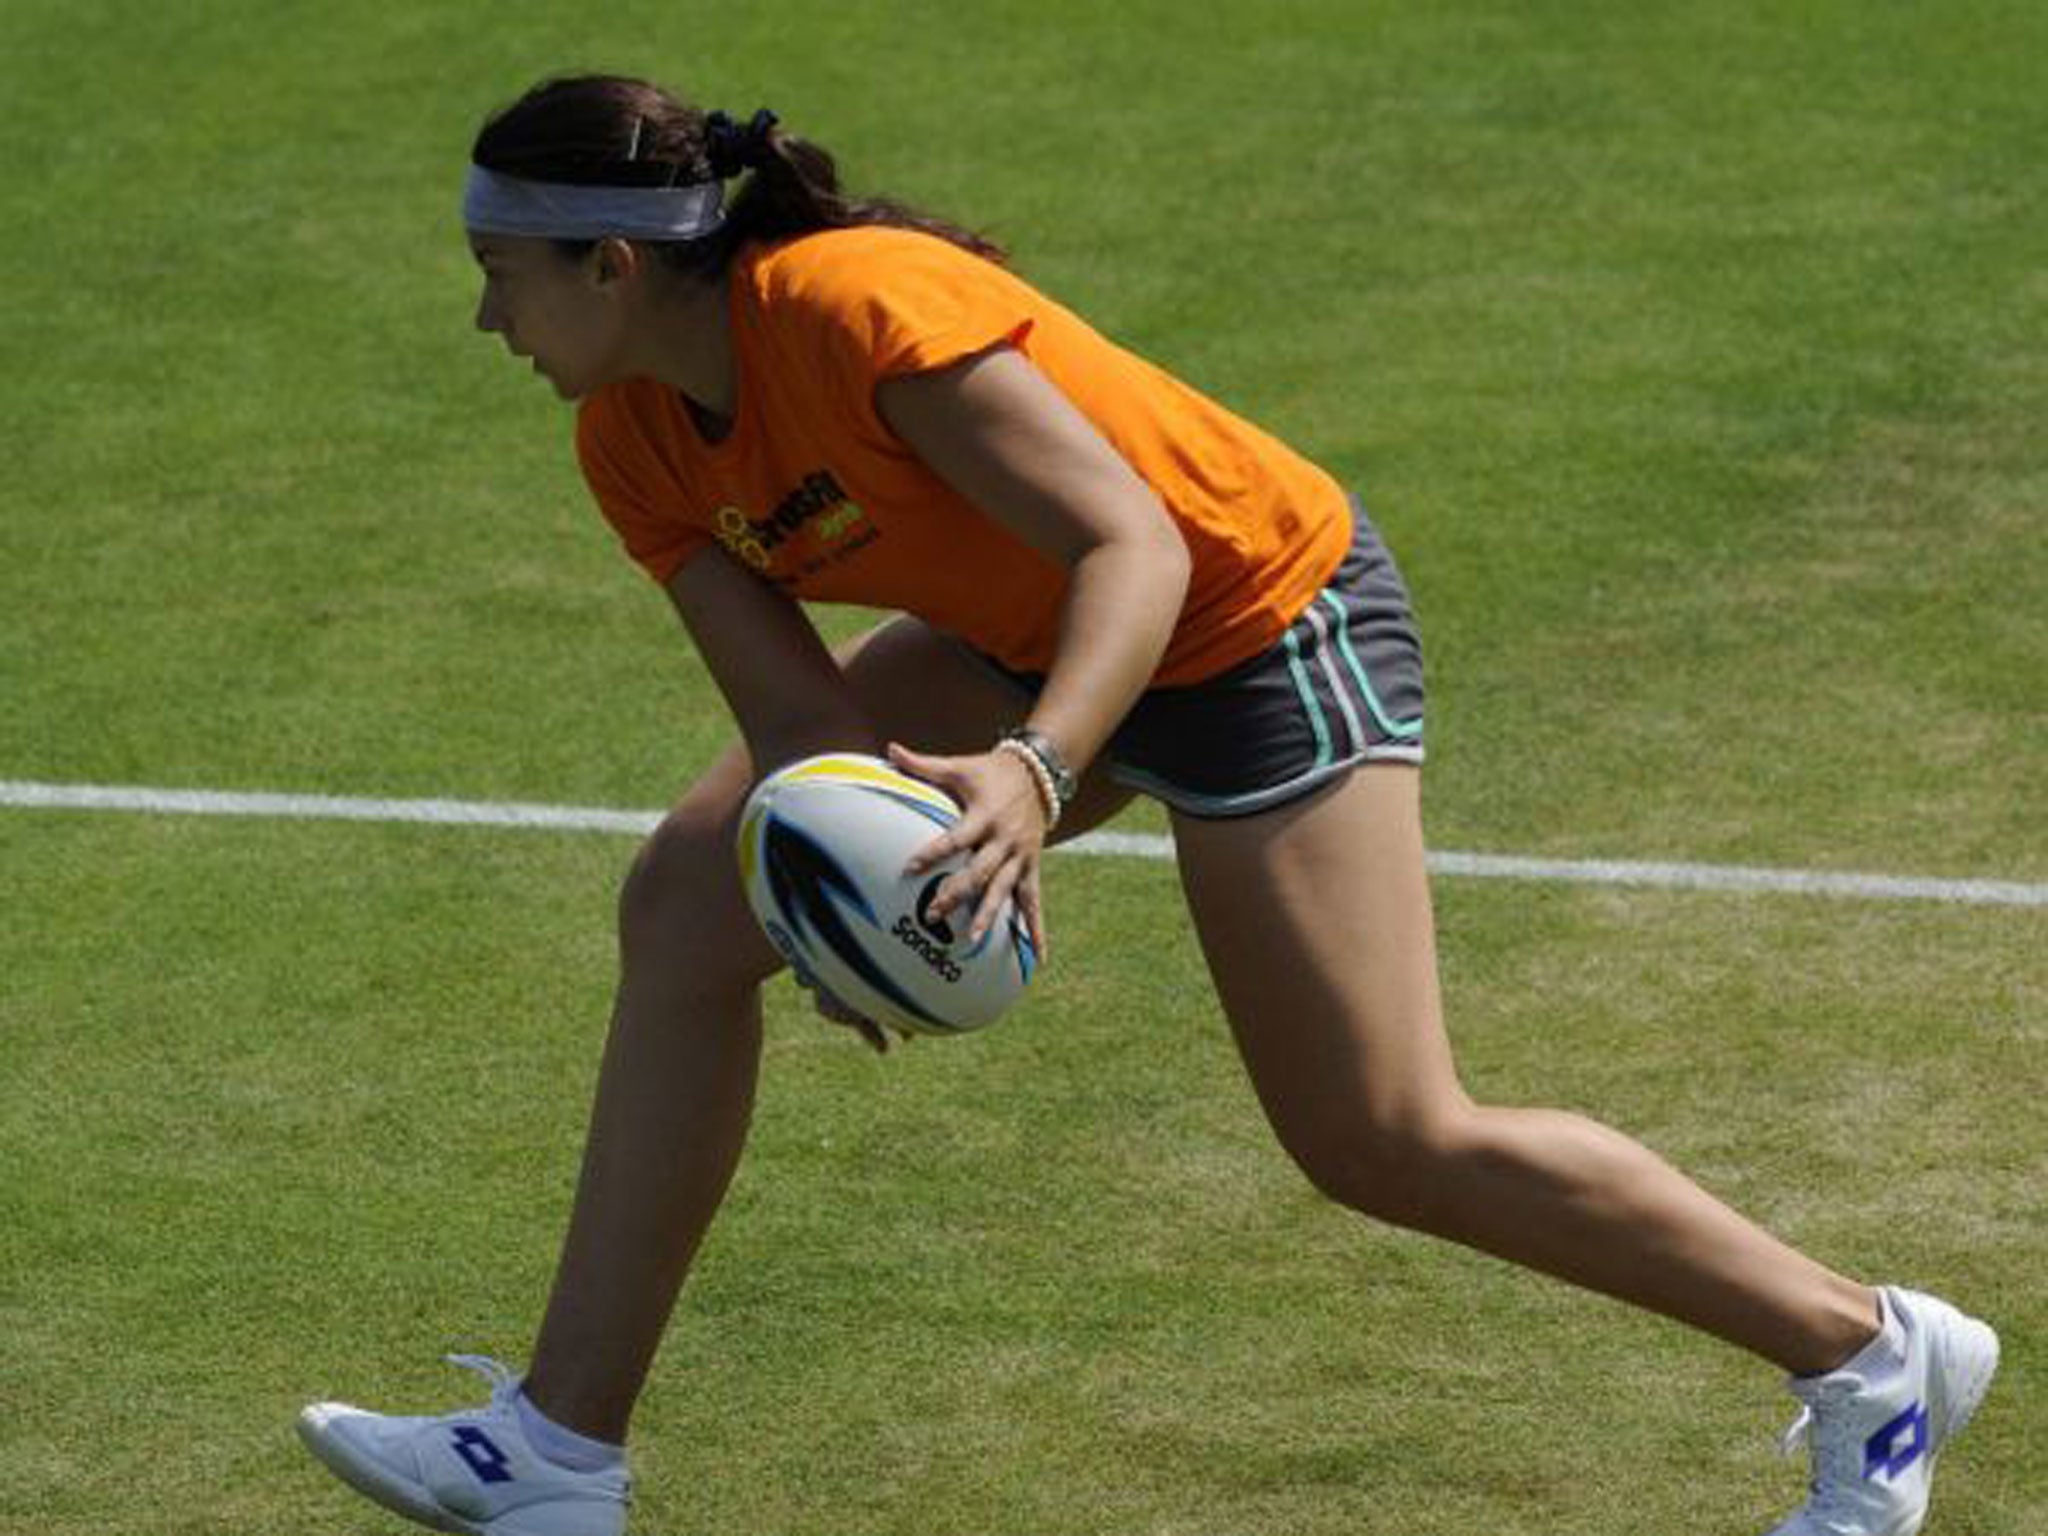 Marion Bartoli shows she is equally adept with a rugby ball in practice yesterday